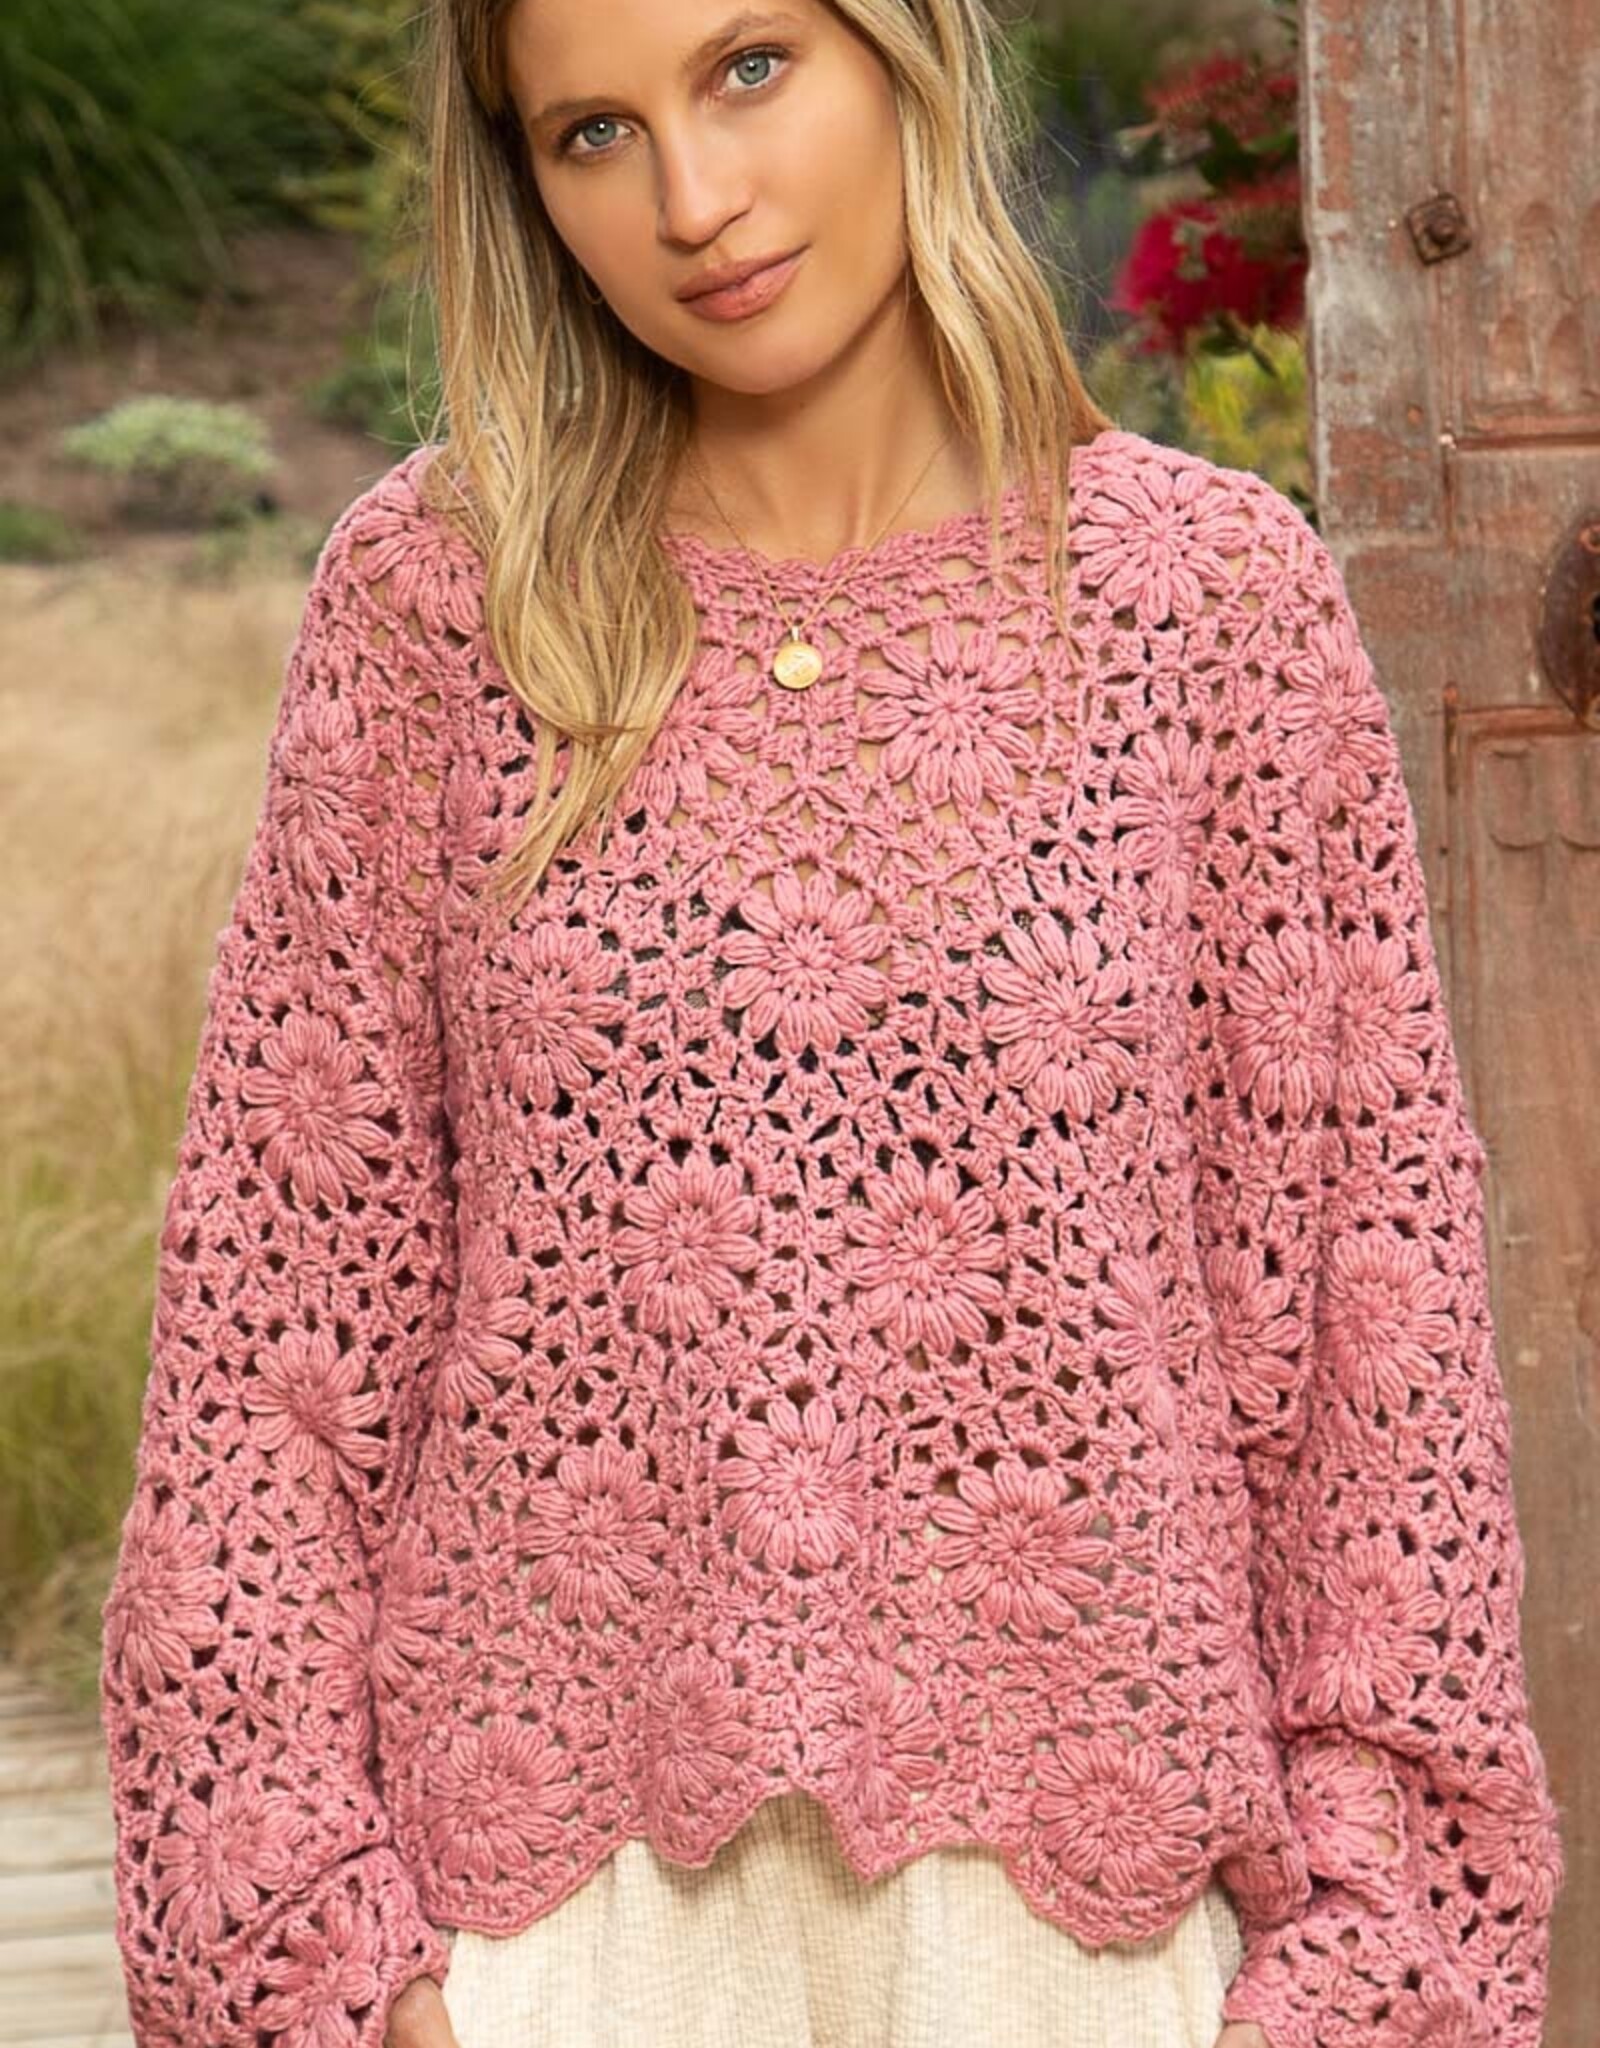 POL Clothing Floral Crochet Knit Pullover